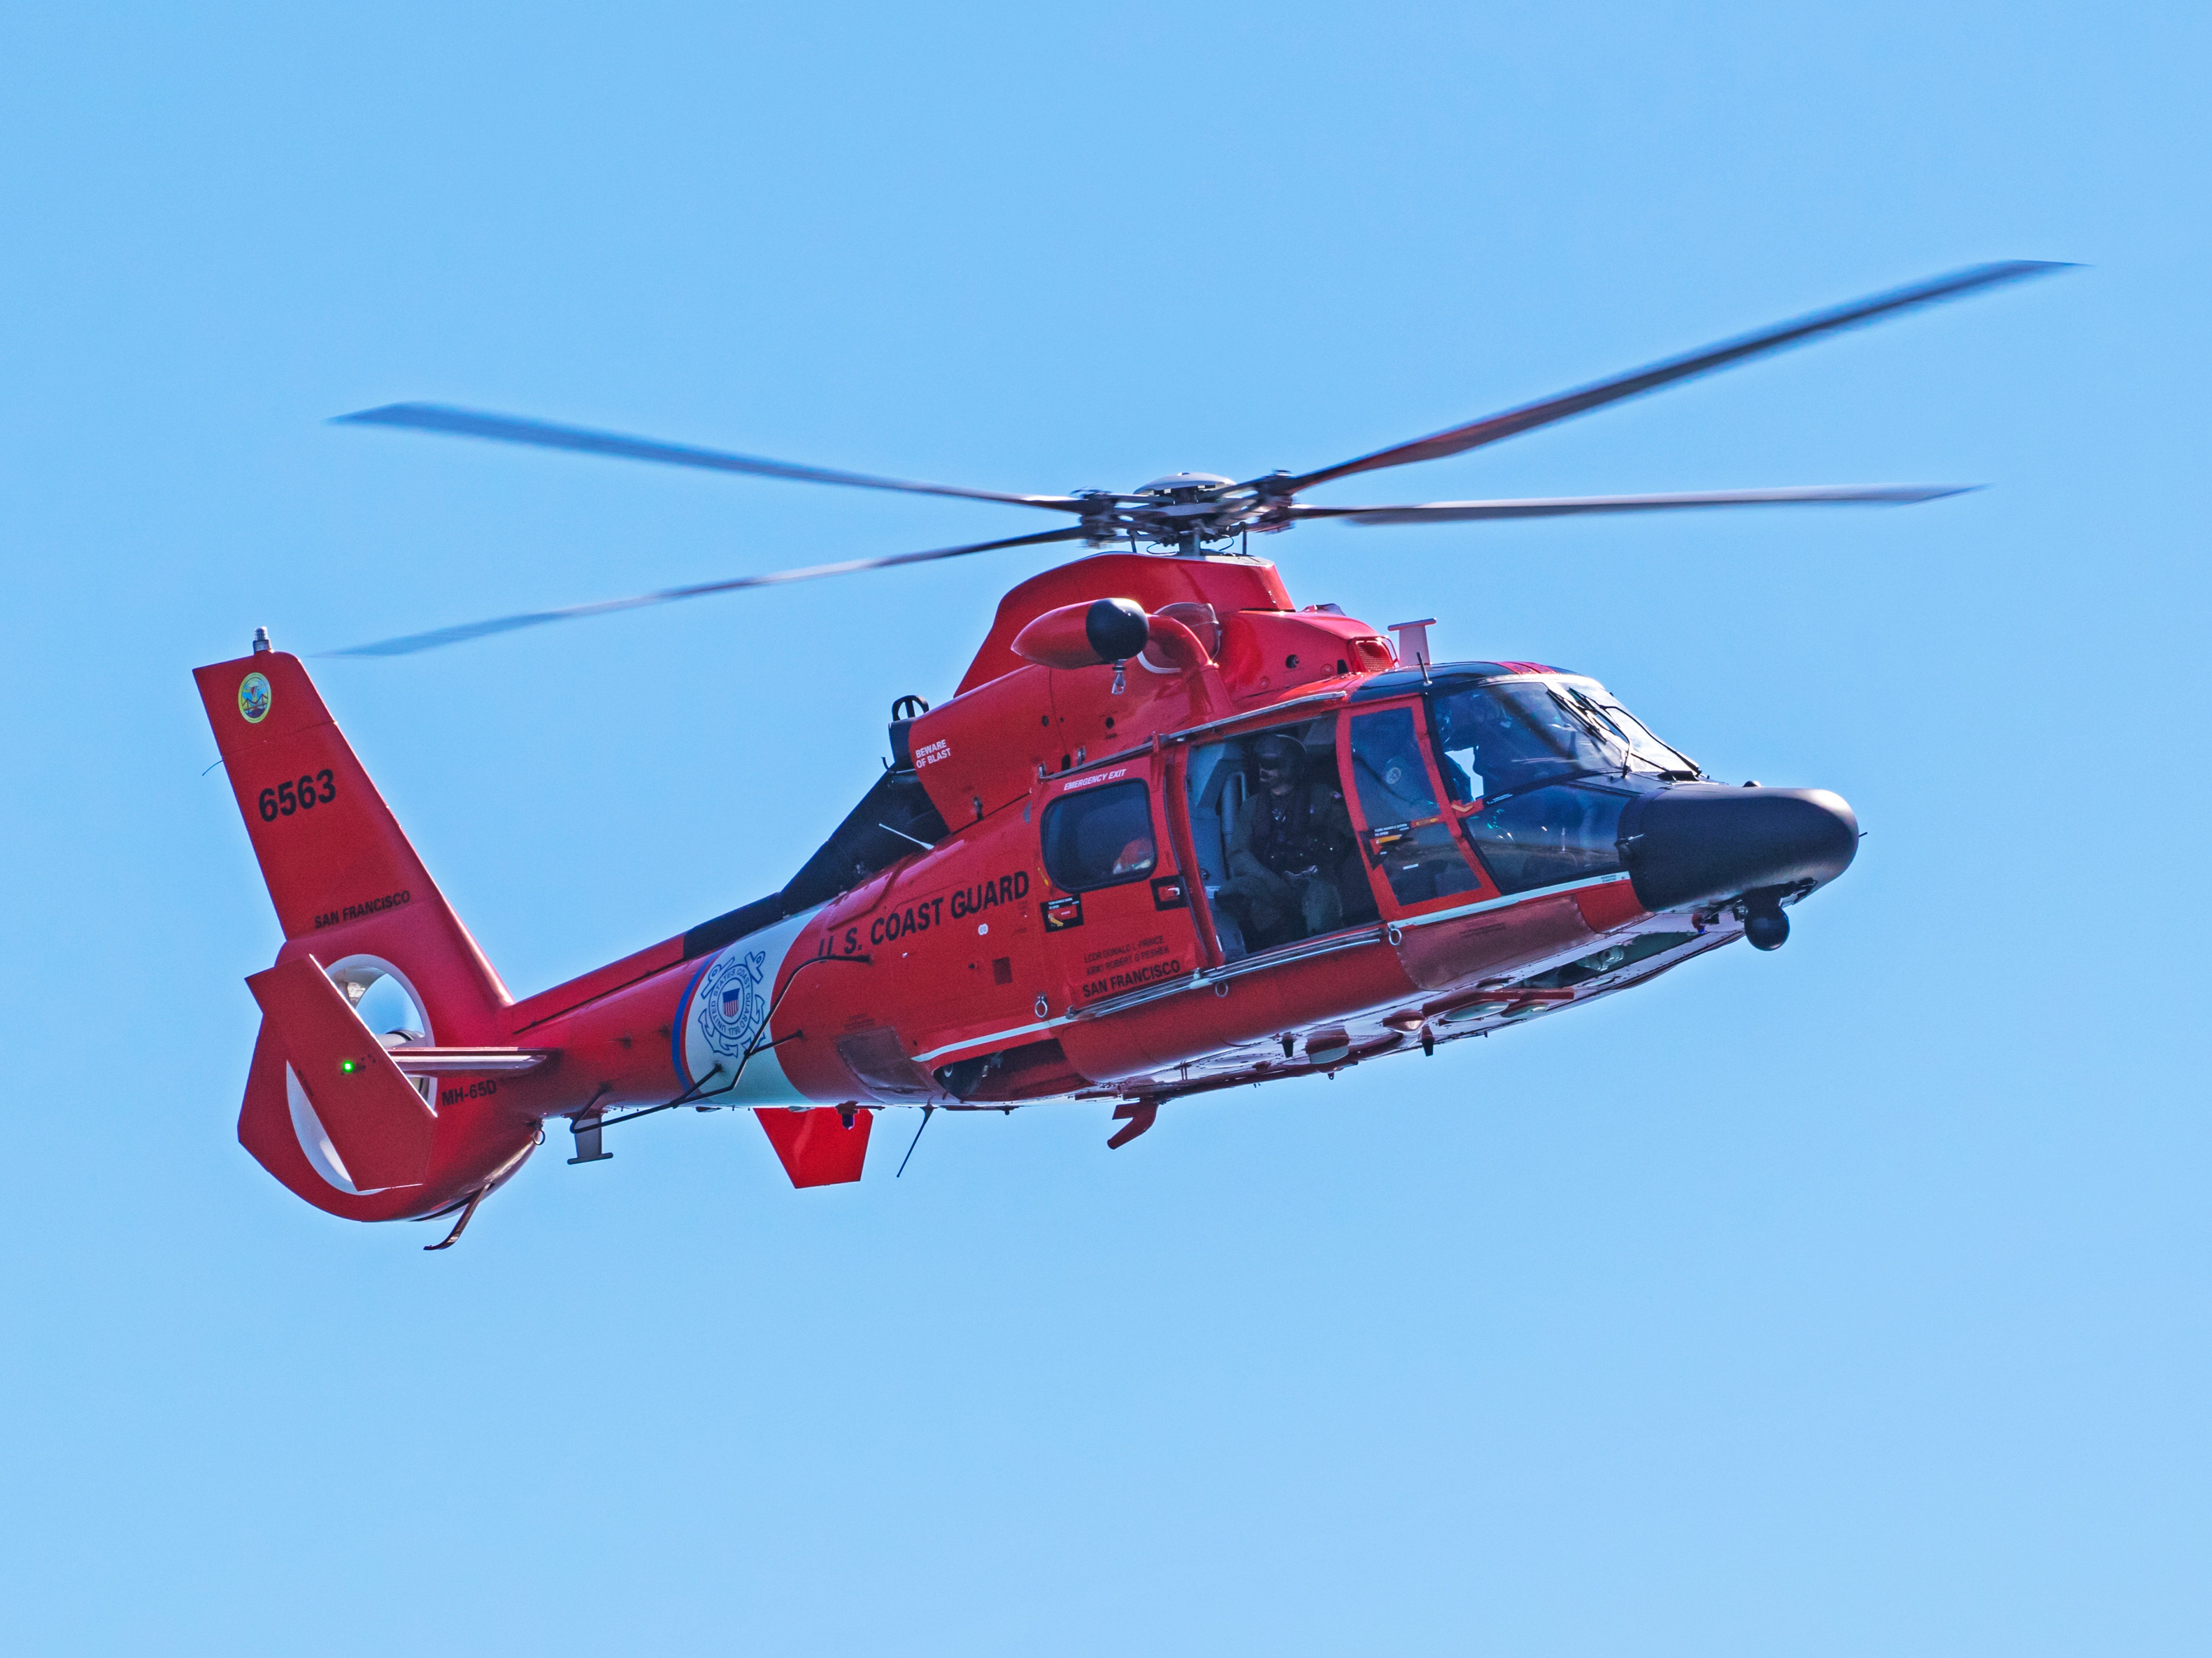 A US Coast Guard helicopter has been dispatched to look for the plane and passengers